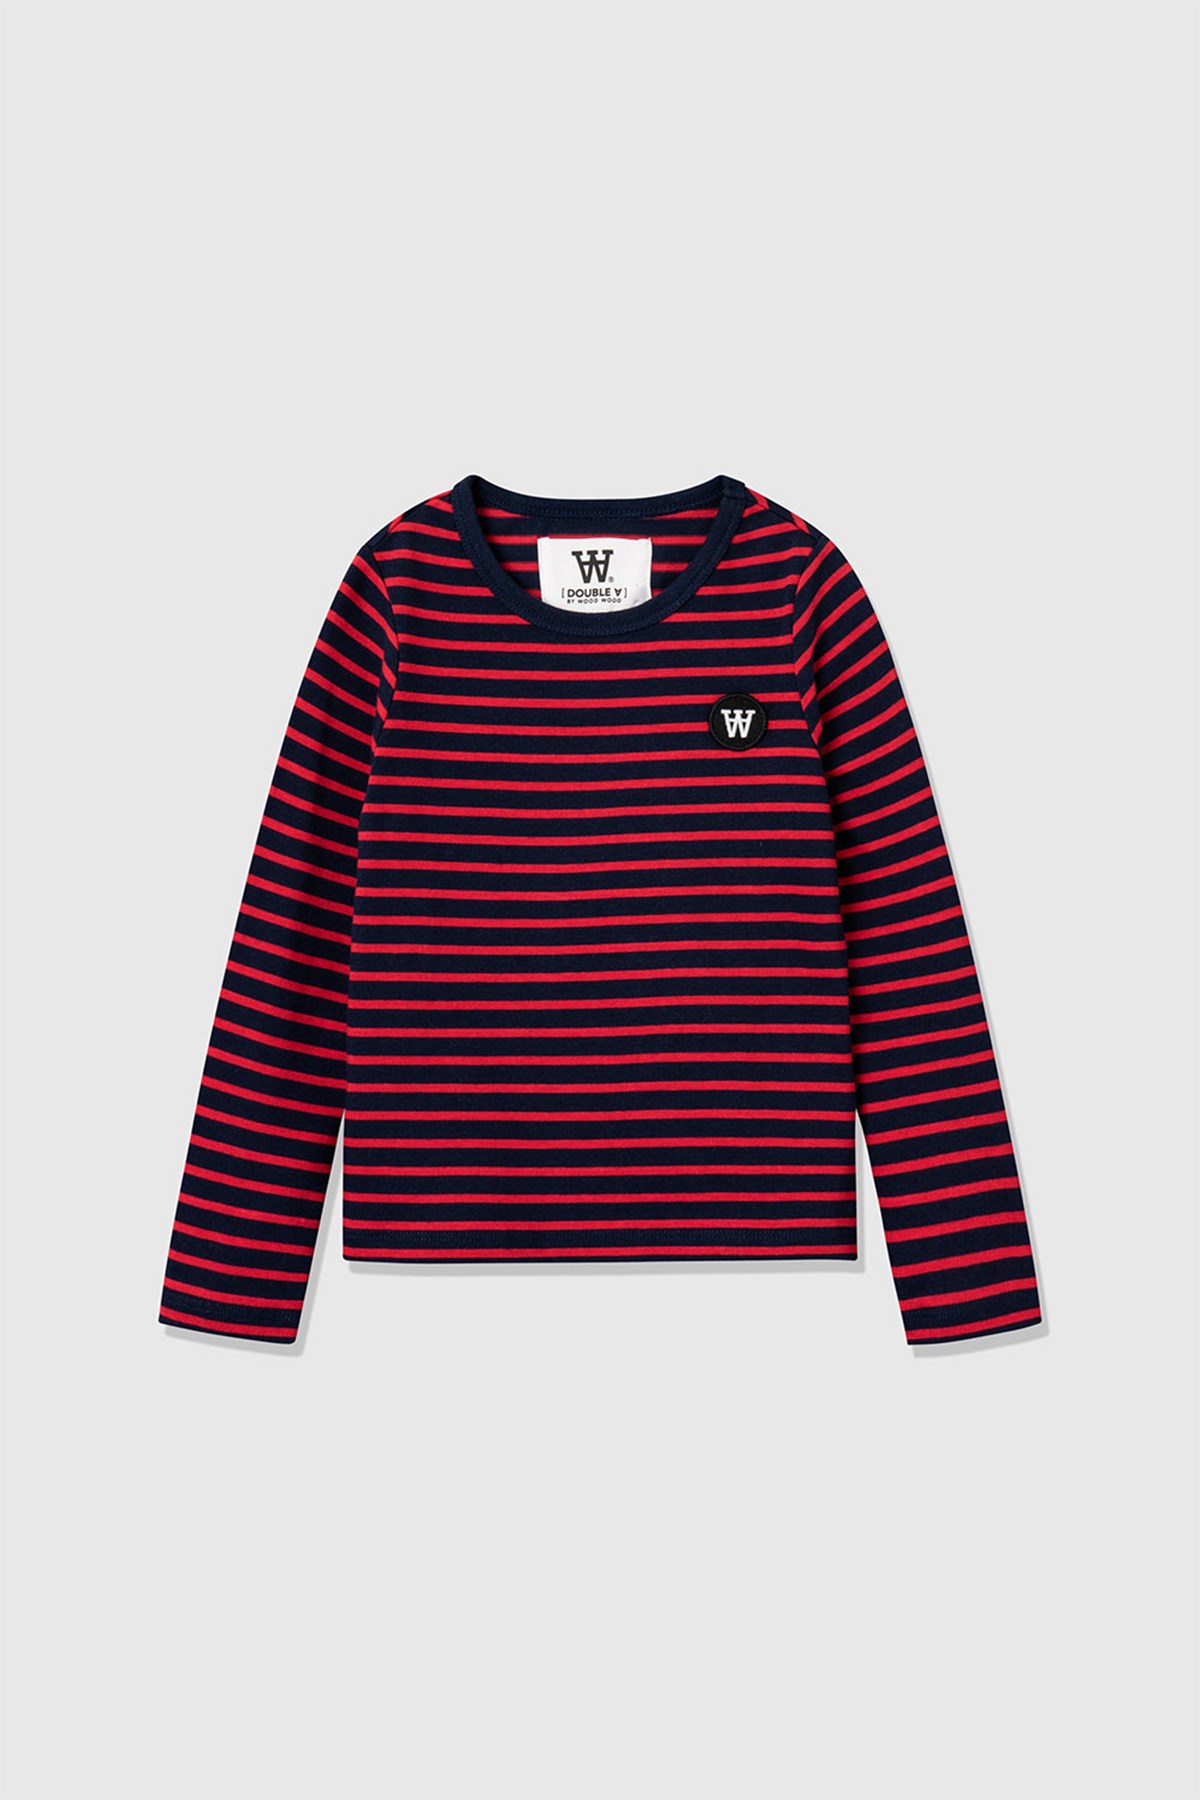 Double A by Wood Wood Kim junior long sleeve GOTS Navy/red stripes ...